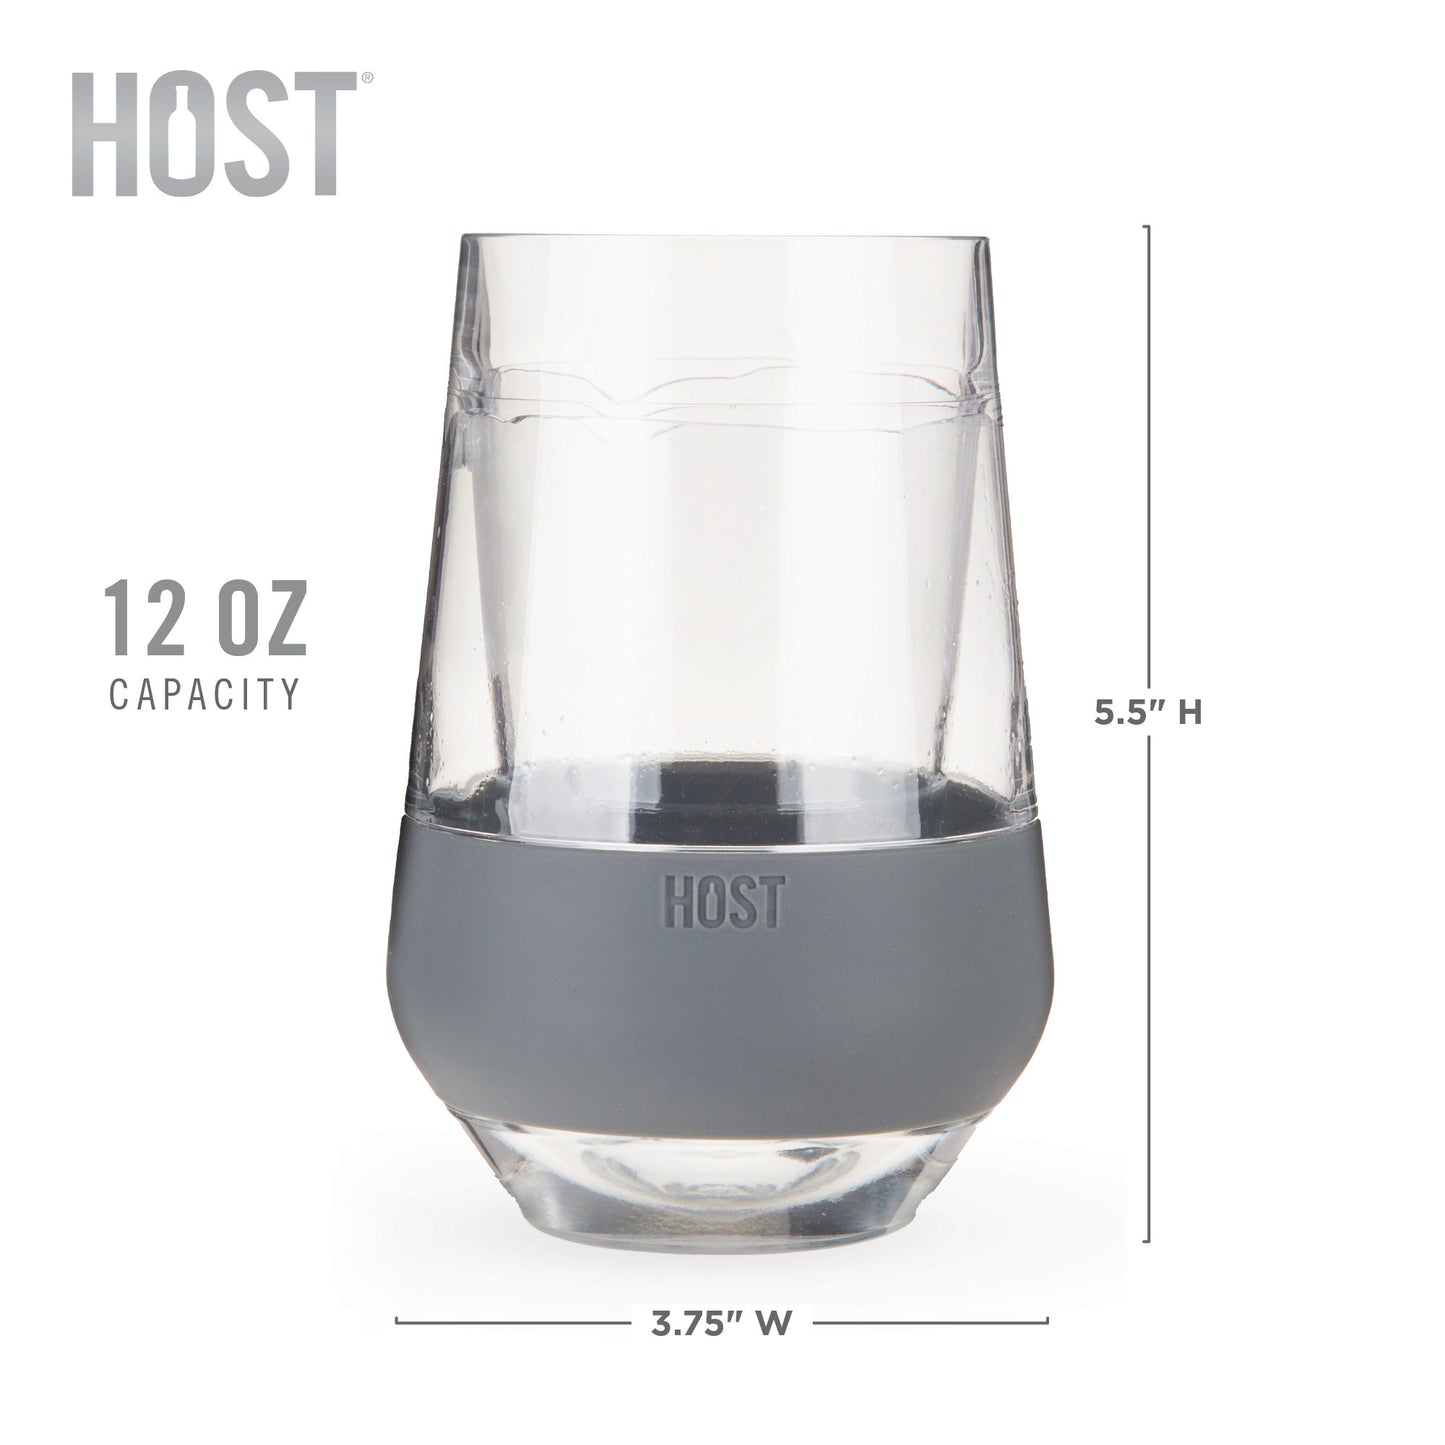 Wine FREEZE™ XL Cup in Gray